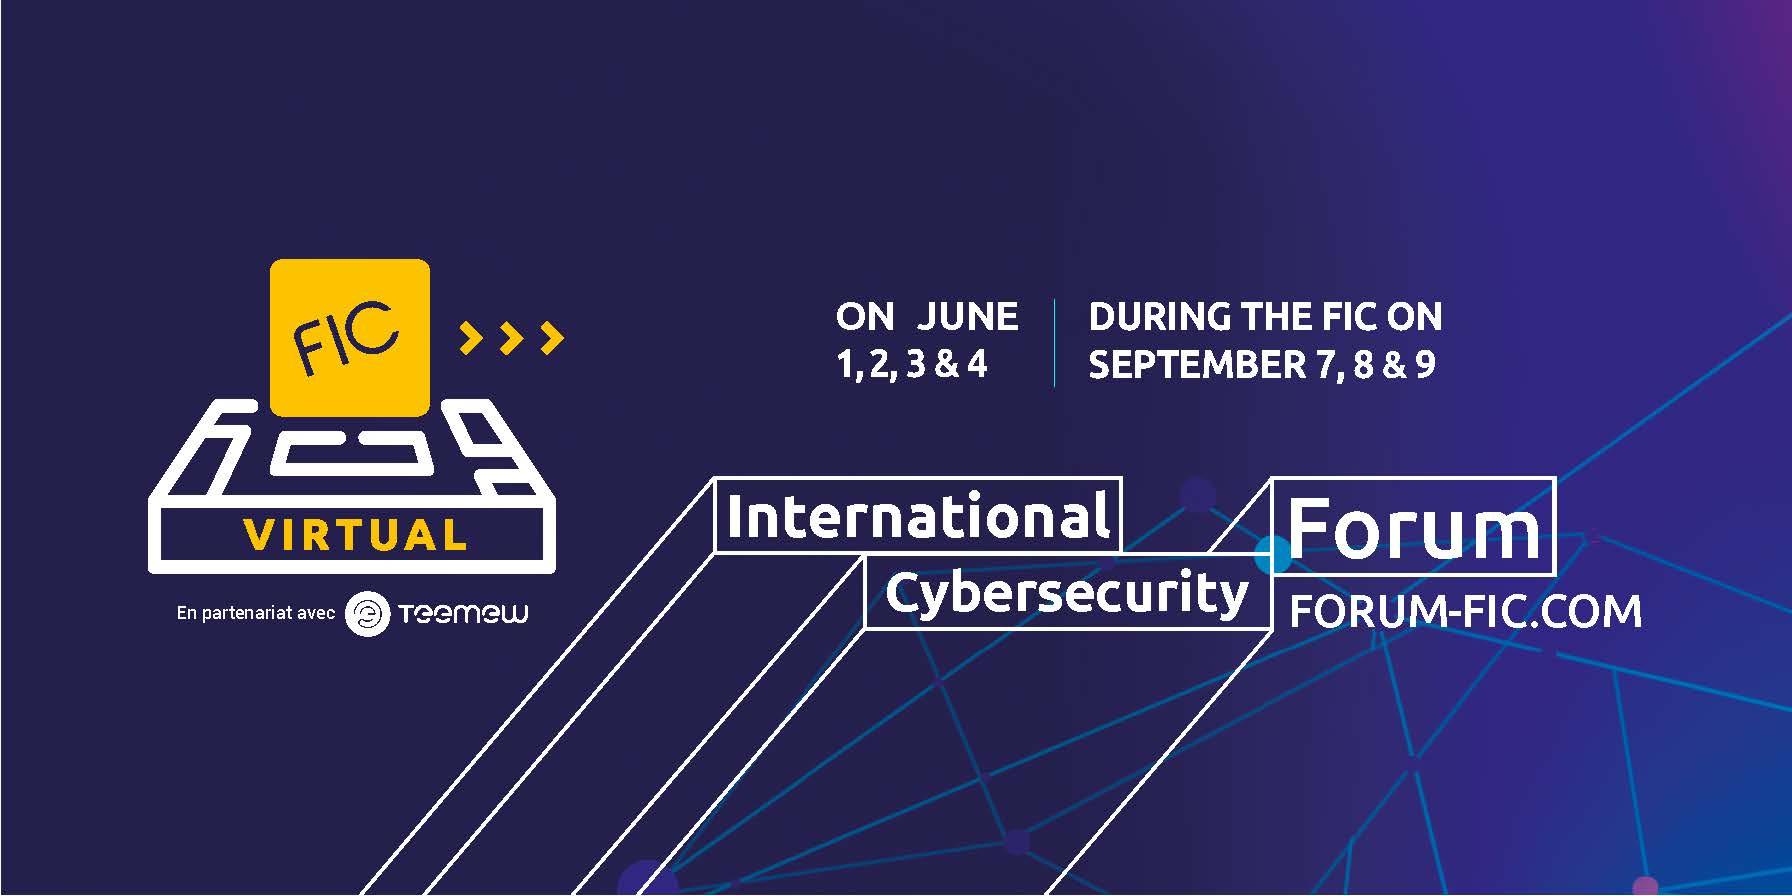 Sweepatic exhibits at the International Cybersecurity Forum